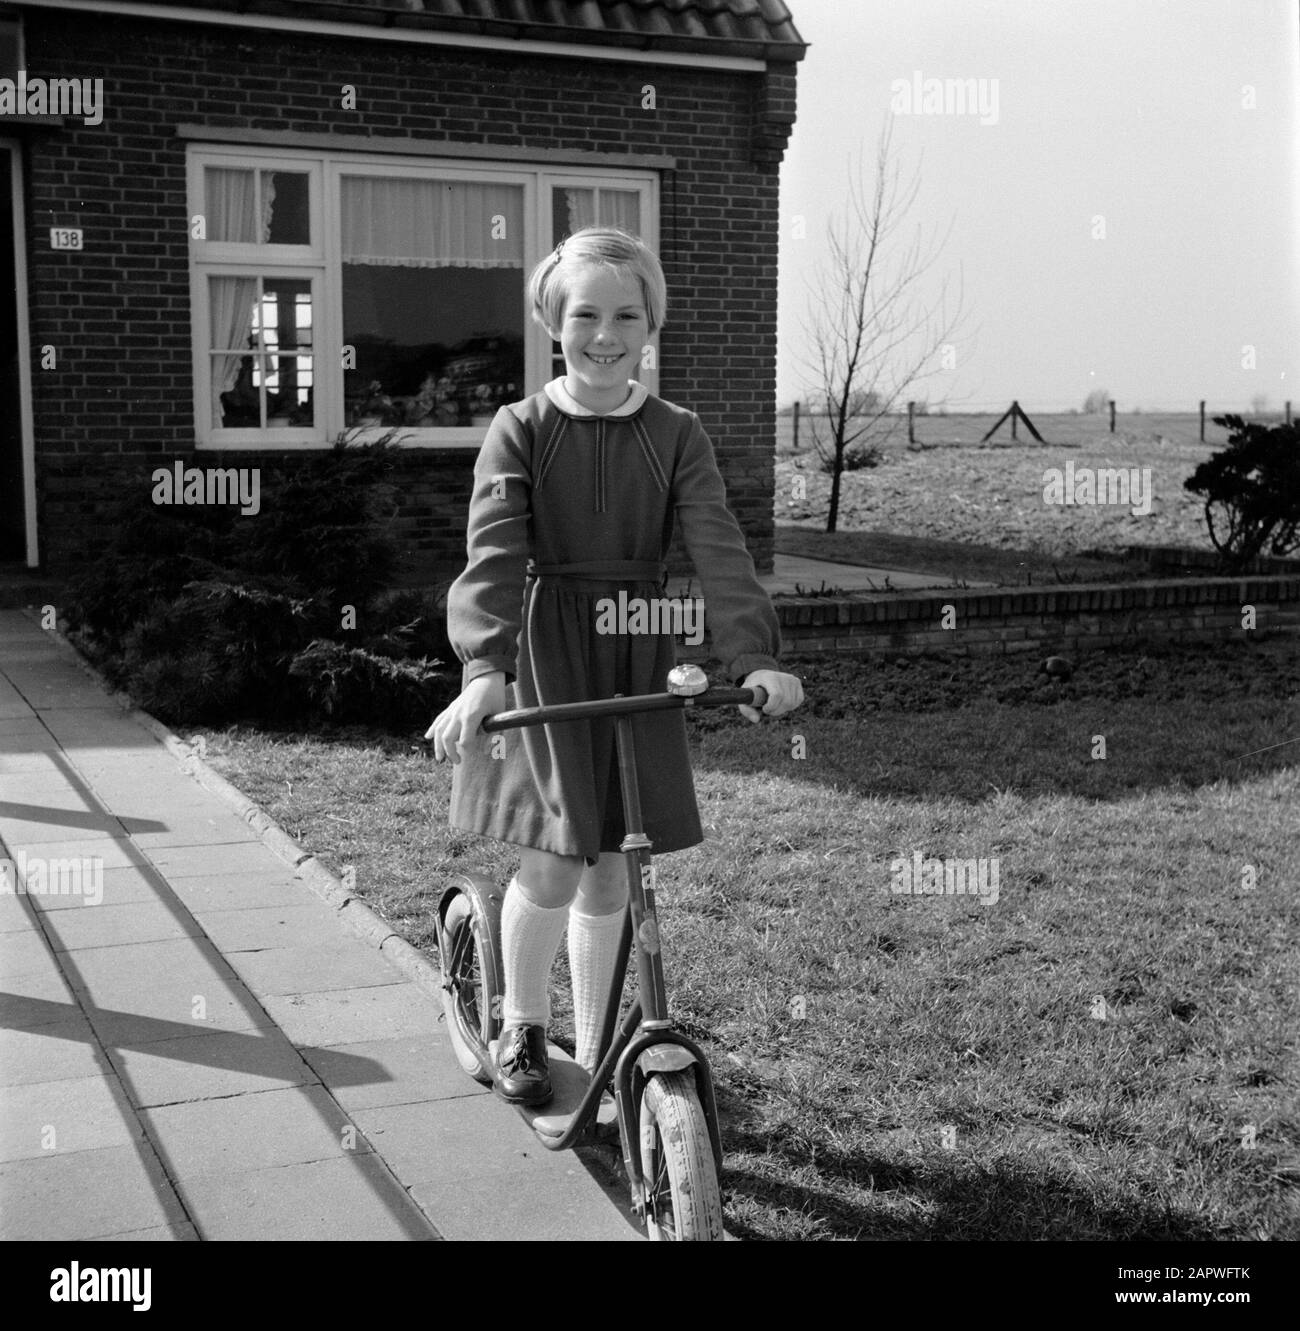 Marietje, the eight-year-old daughter of Gerard, on her autoped in the front garden Annotation: Gerard de Jong survived a fusillade on April 7, 1945 at Dronrijp Date: 1 January 1955 Location: Friesland, Leeuwarden Keywords: autopeds, girls, gardens, homes Personal name: Jong, Marietje de Stock Photo